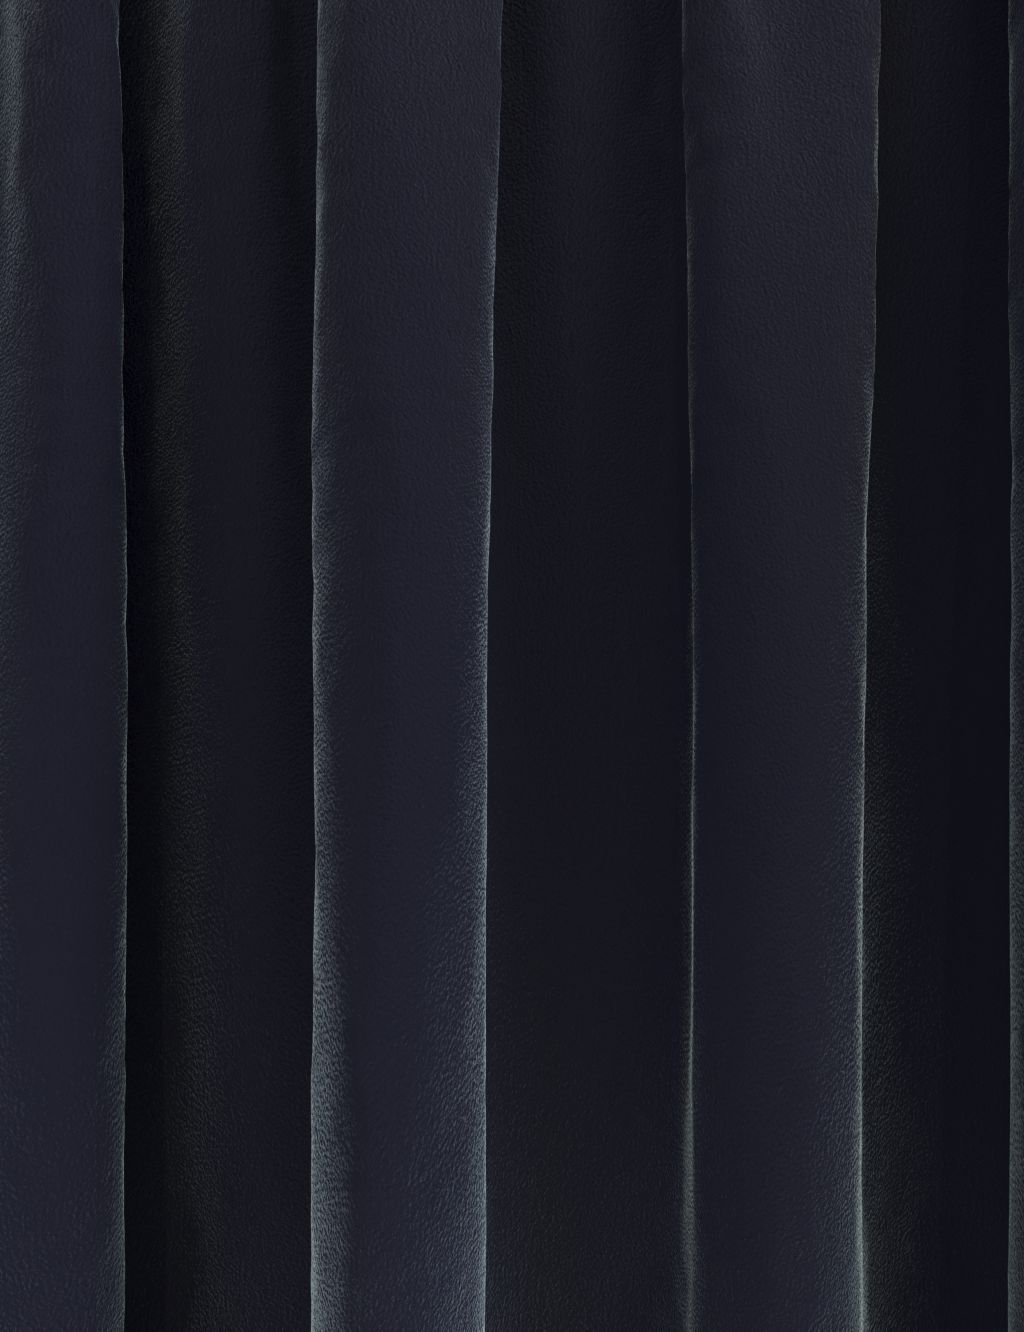 Velvet Pencil Pleat Ultra Thermal Curtains image 2